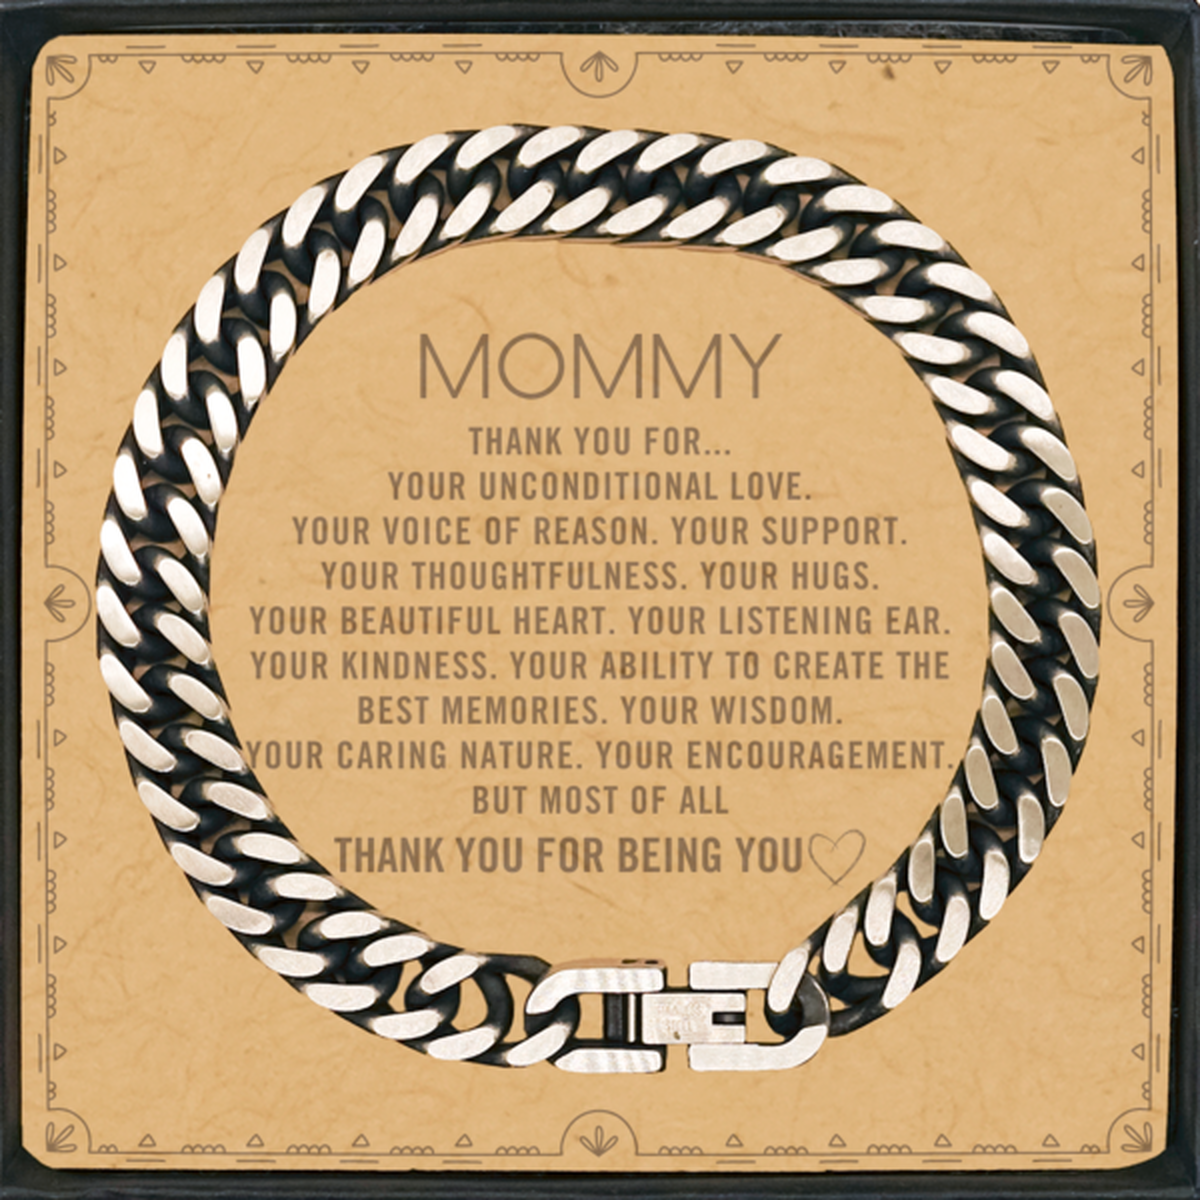 Mommy Cuban Link Chain Bracelet Custom, Message Card Gifts For Mommy Christmas Graduation Birthday Gifts for Men Women Mommy Thank you for Your unconditional love